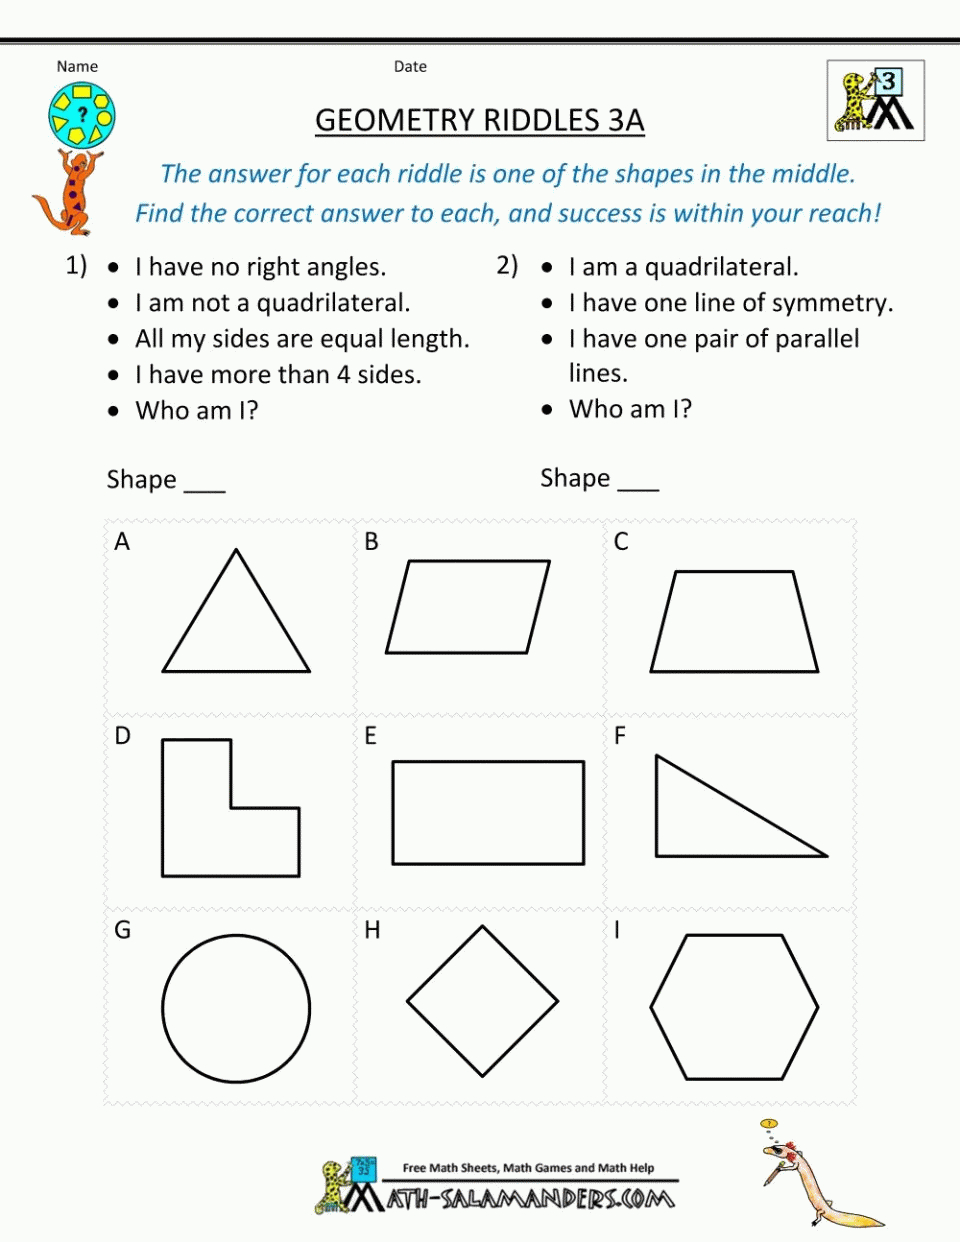 free-math-worksheets-fun-puzzle-high-school-multiplication-db-excel